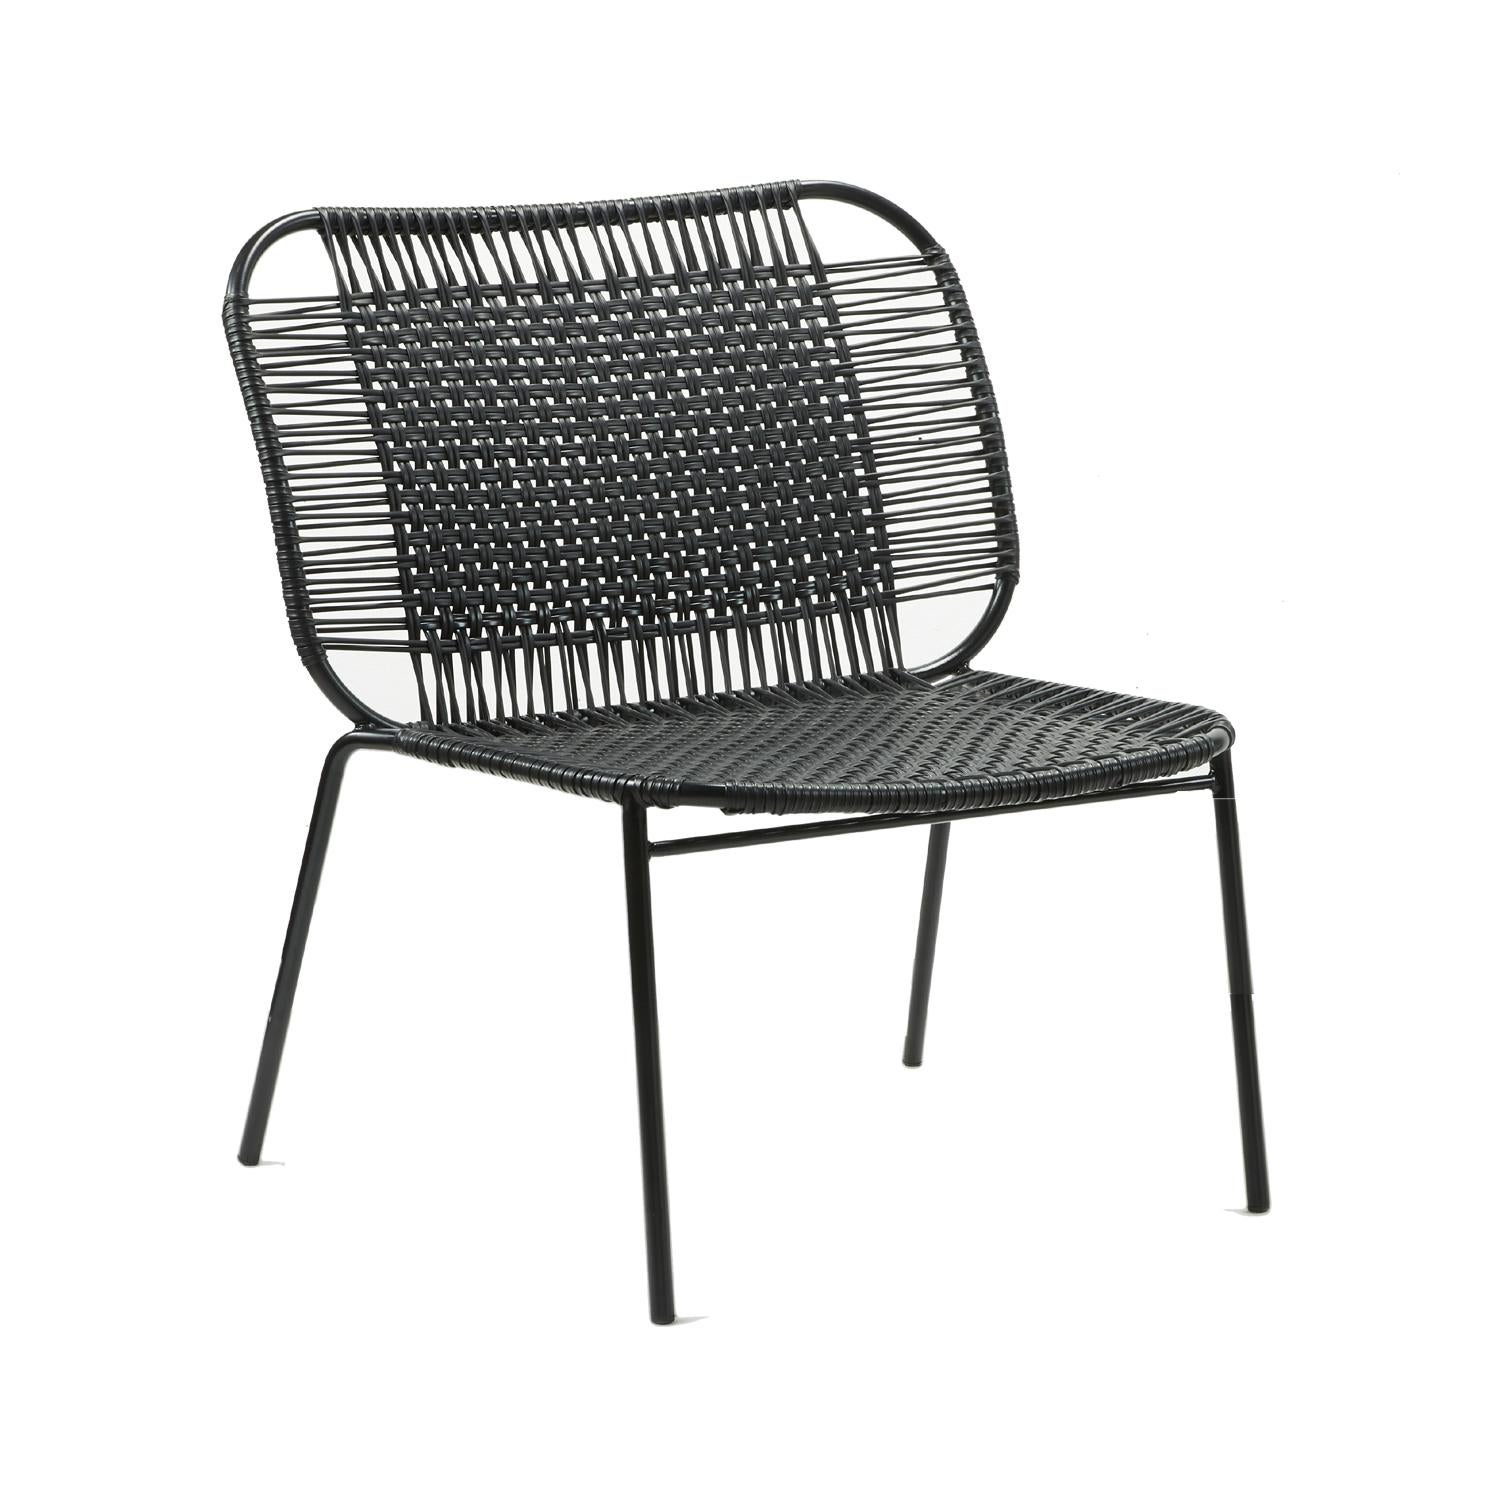 Set of 2 black Cielo lounge low chair by Sebastian Herkner
Materials: Galvanized and powder-coated tubular steel. PVC strings are made from recycled plastic.
Technique: Made from recycled plastic and weaved by local craftspeople in Cartagena,